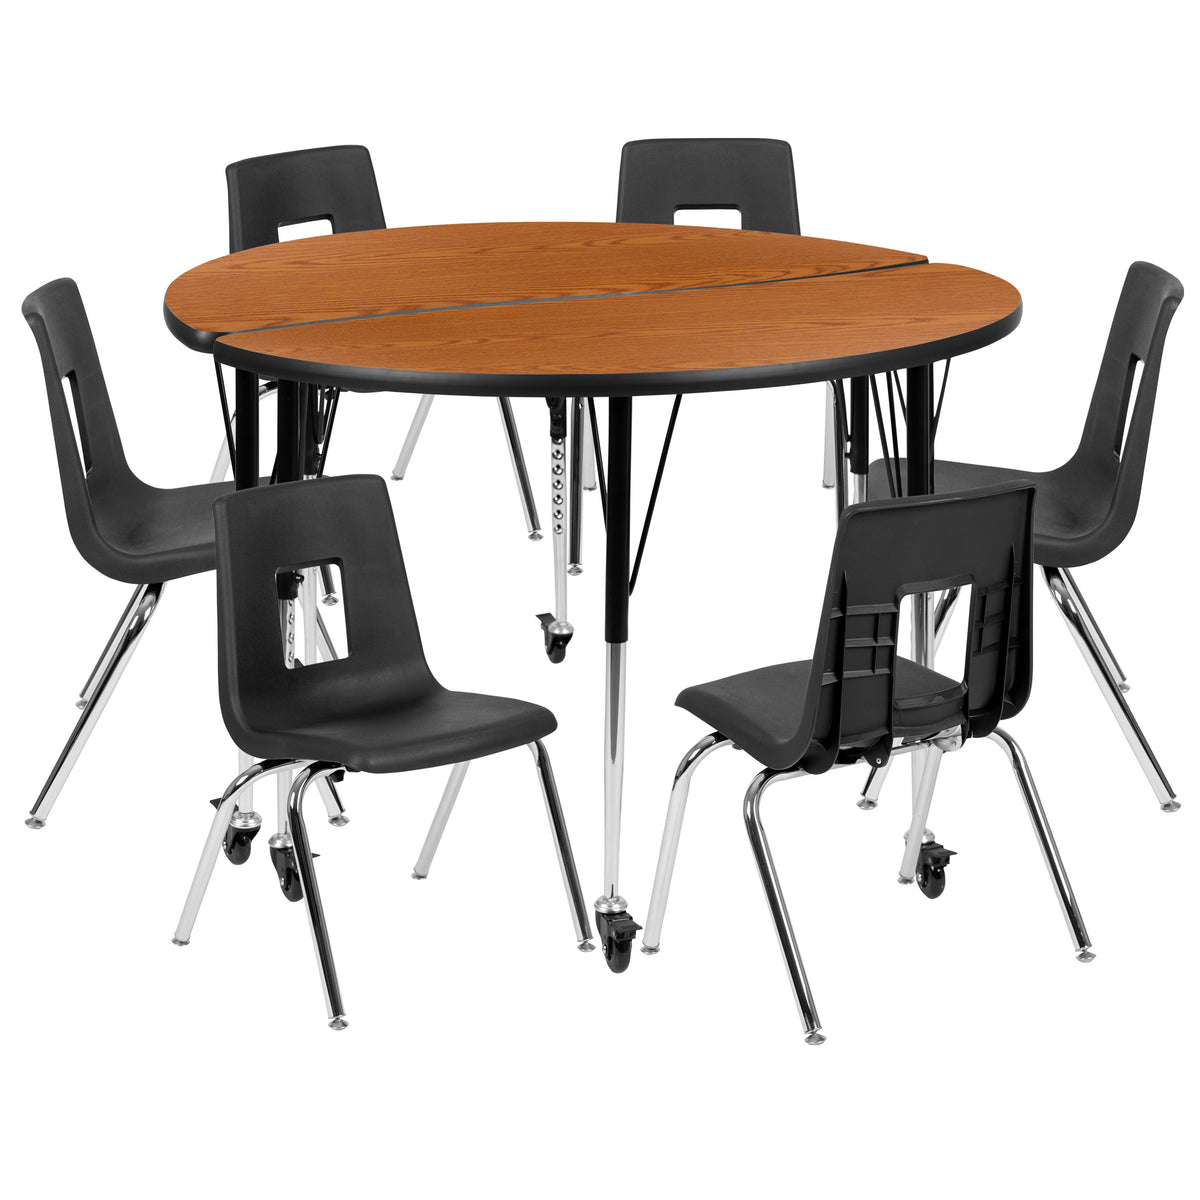 Oak |#| Mobile 47.5inch Circle Wave Activity Table Set-16inch Student Stack Chairs, Oak/Black